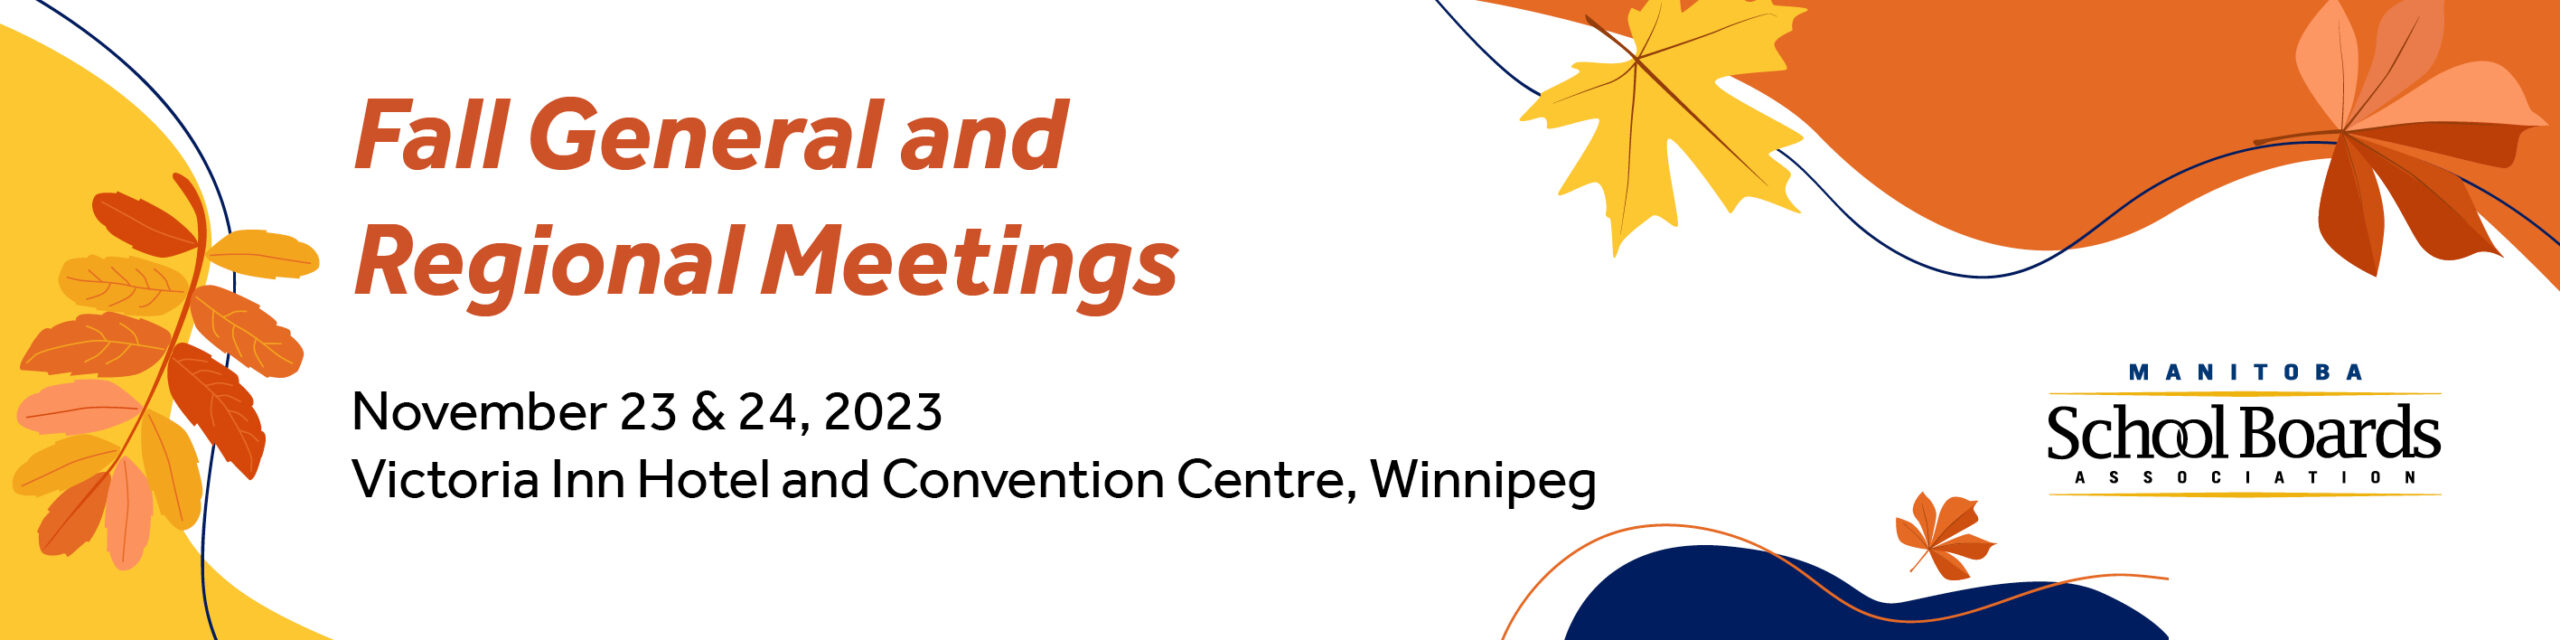 Decorative banner image with fall leaves and the text "Fall General and Regional Meetings" November 23 & 24, 2023. Victoria Inn Hotel and Convention Centre, Winnipeg. Manitoba School Boards Association Logo. 